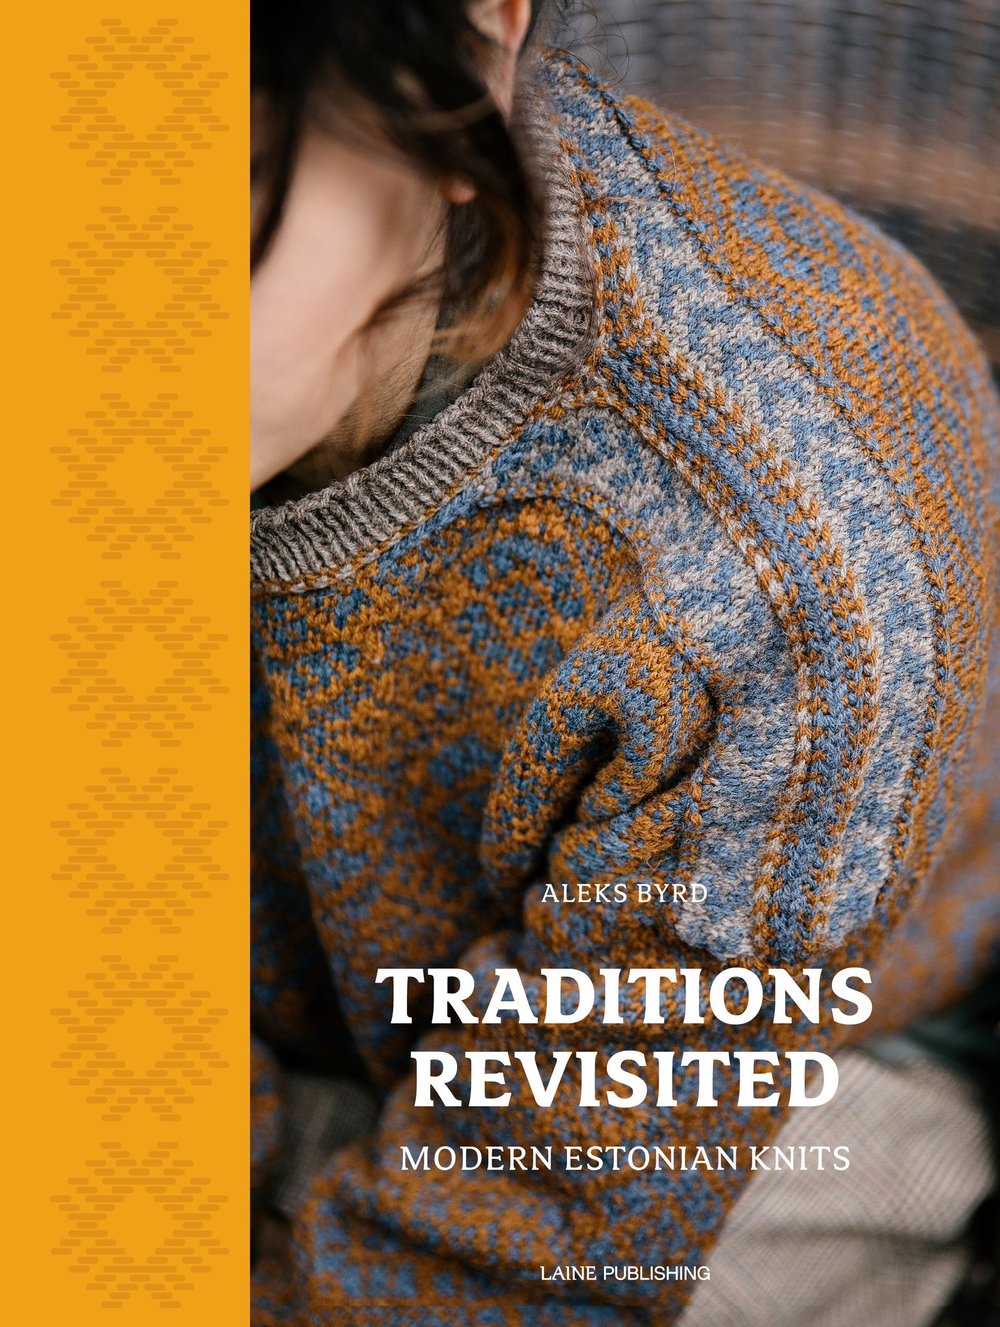 Traditions Revisited: Modern Estonian Knits by Aleks Byrd Laine